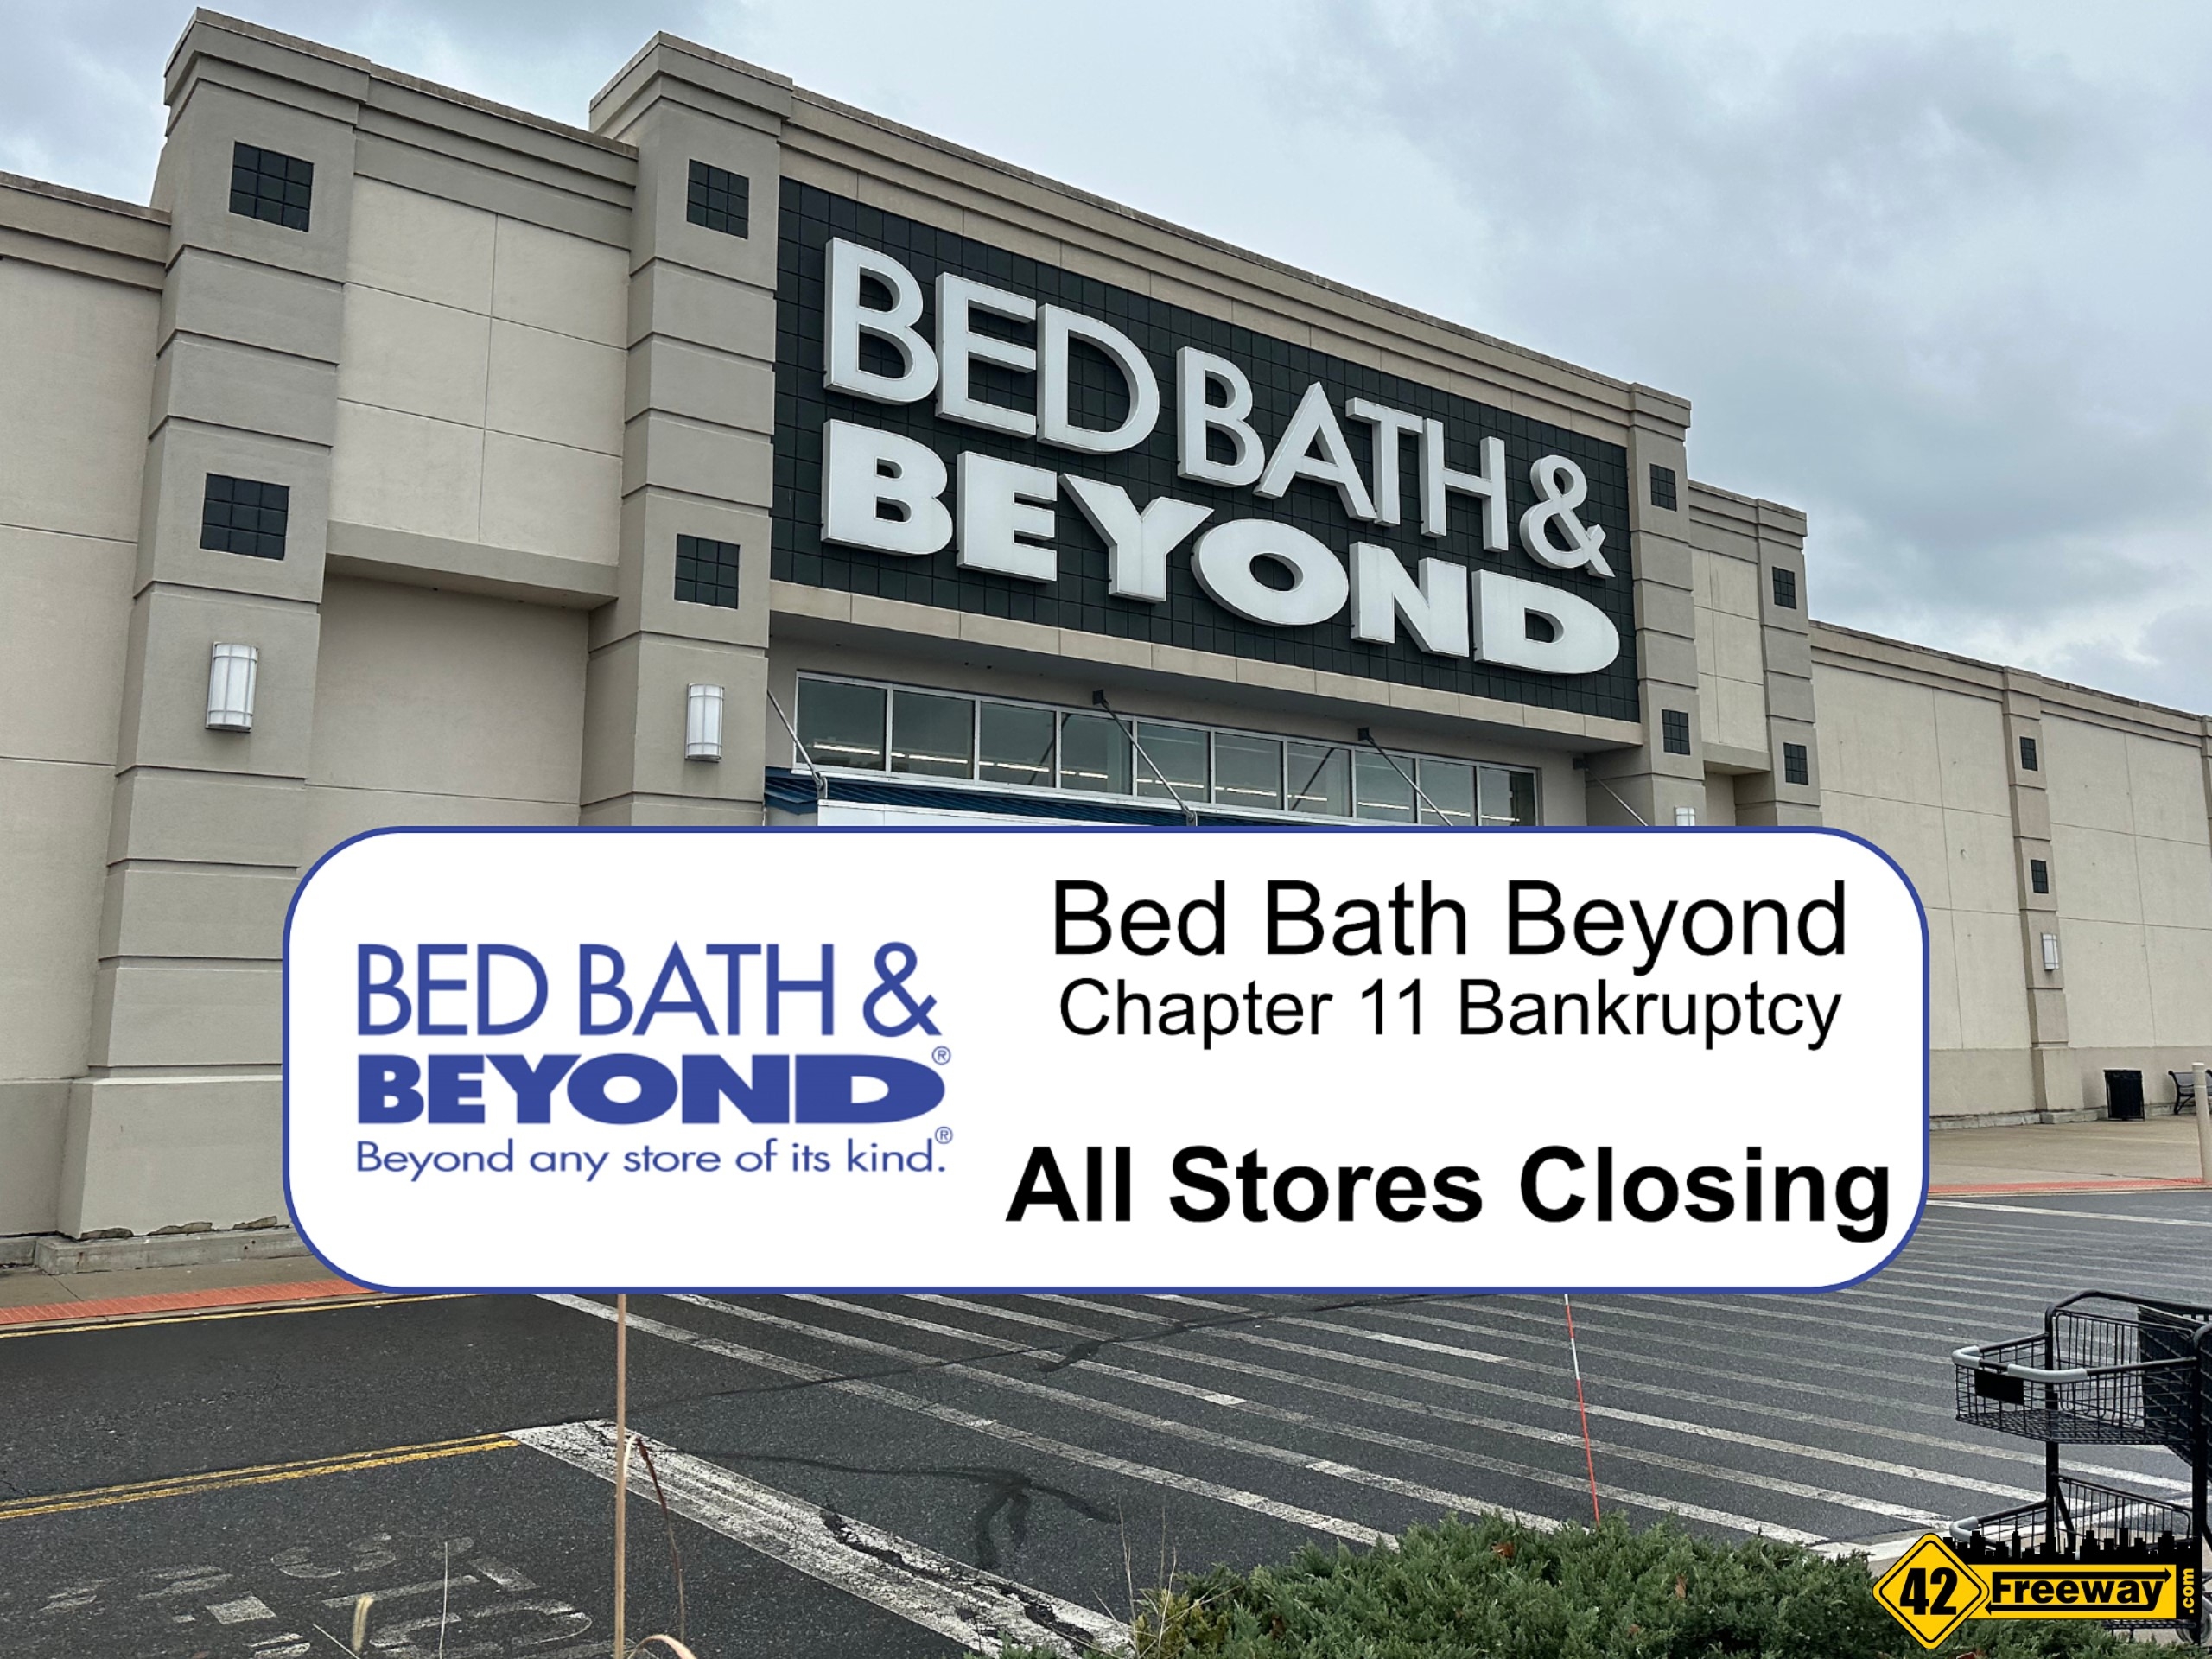 Bed Bath & Beyond Files Chapter 11 Bankruptcy. Closing Sales Start